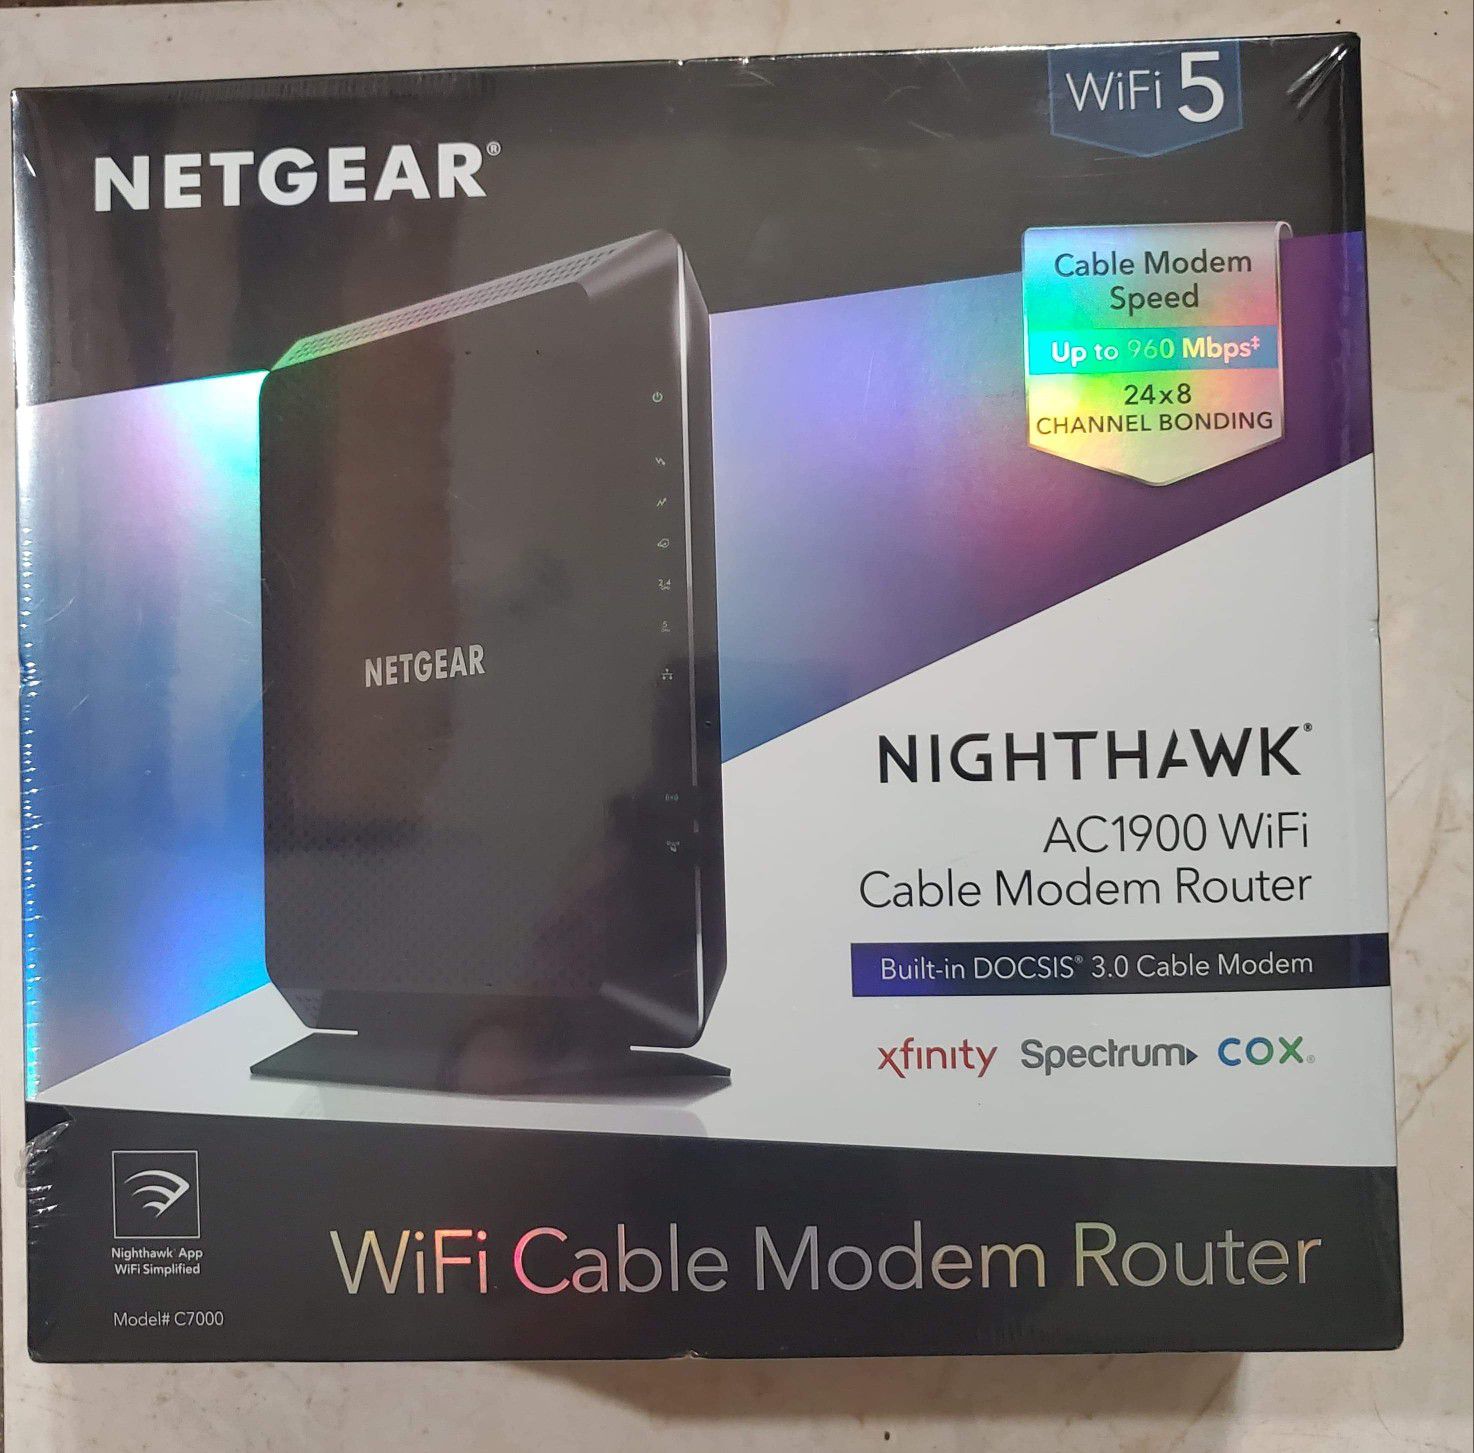 Netgear NightHawk AC1900 WiFi Cable Modem Router Built-In DOCSIS 3.0 Cable